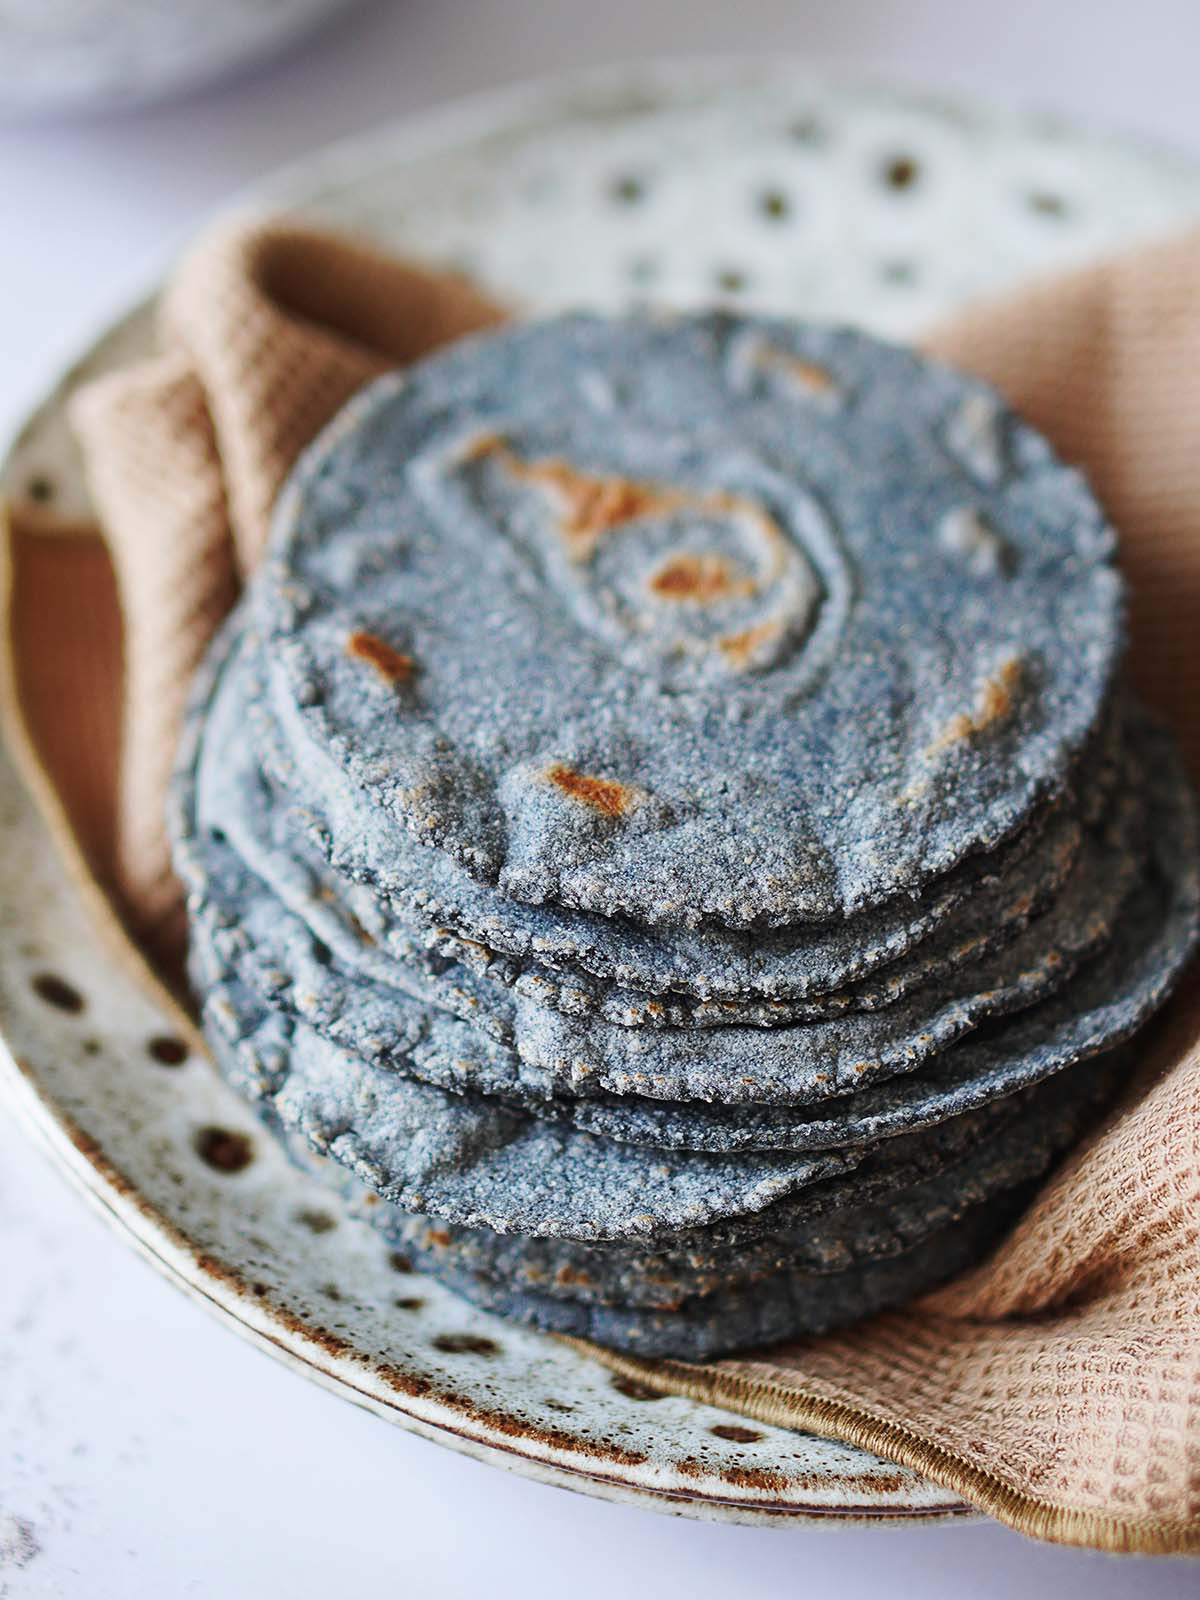 A stack of blue corn tortillas placed on a brown kitchen towel.